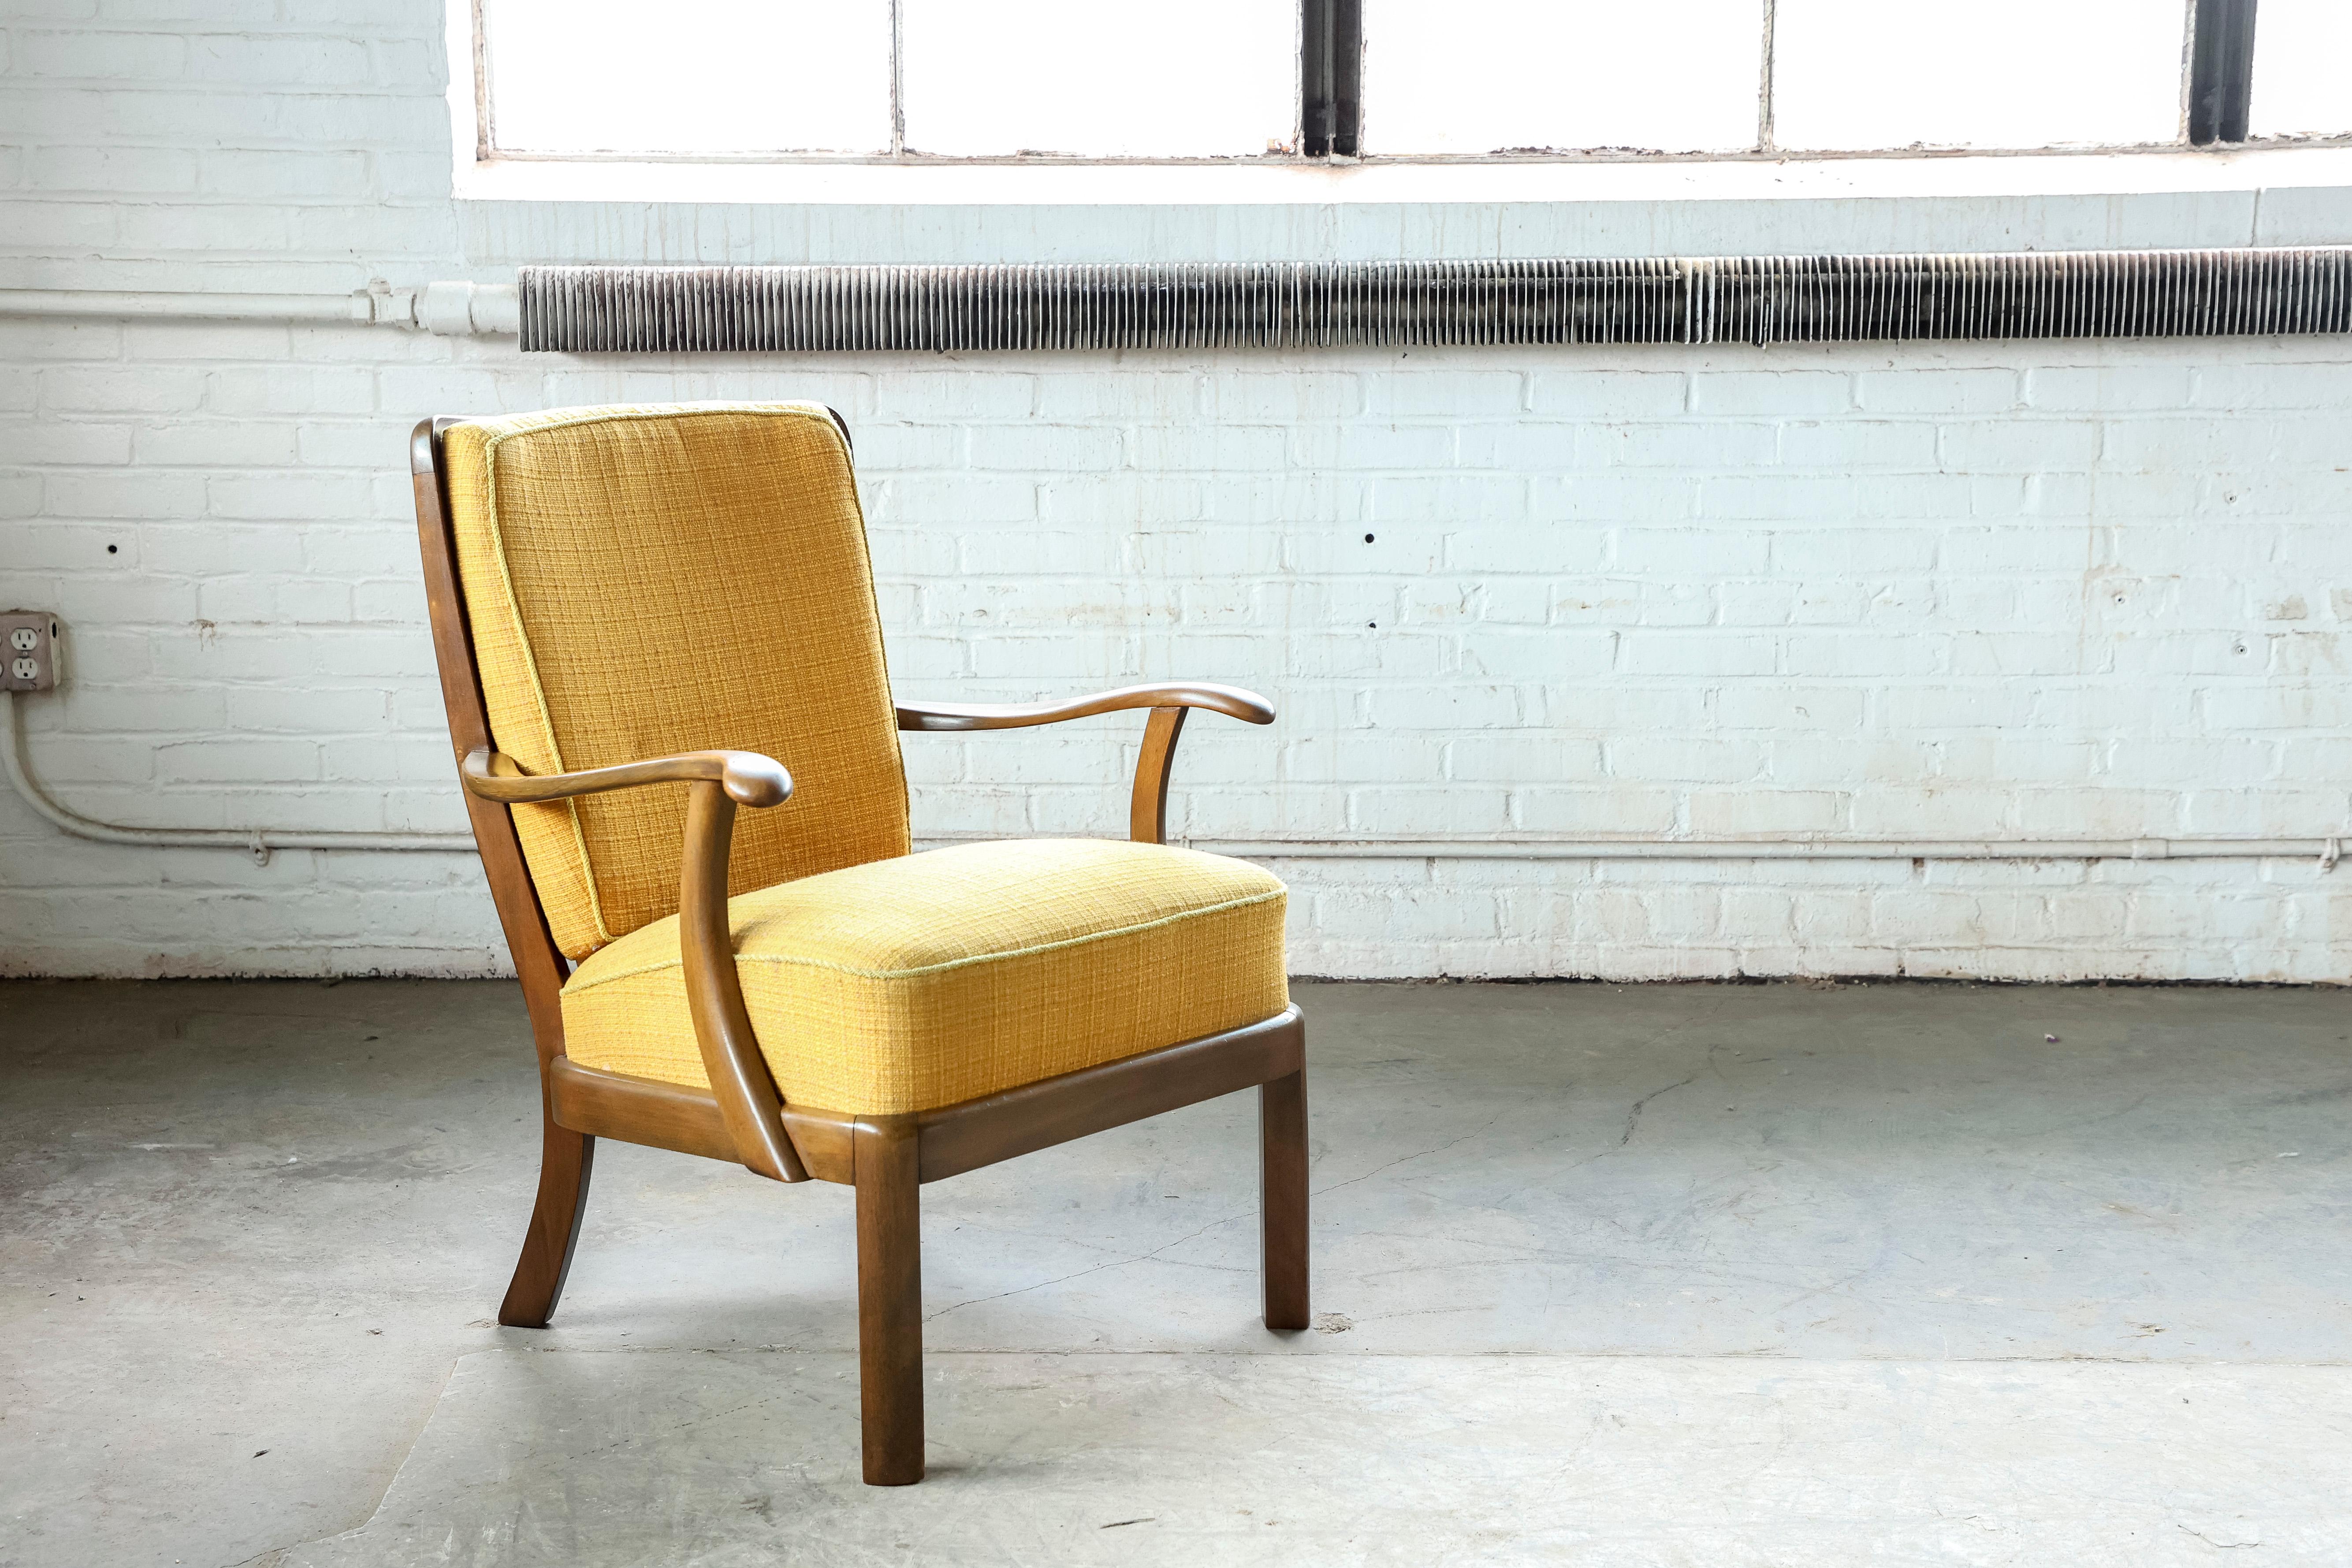 Mid-20th Century Danish Midcentury Lounge Chair with Slat Back Attributed to Edmund Jorgensen For Sale